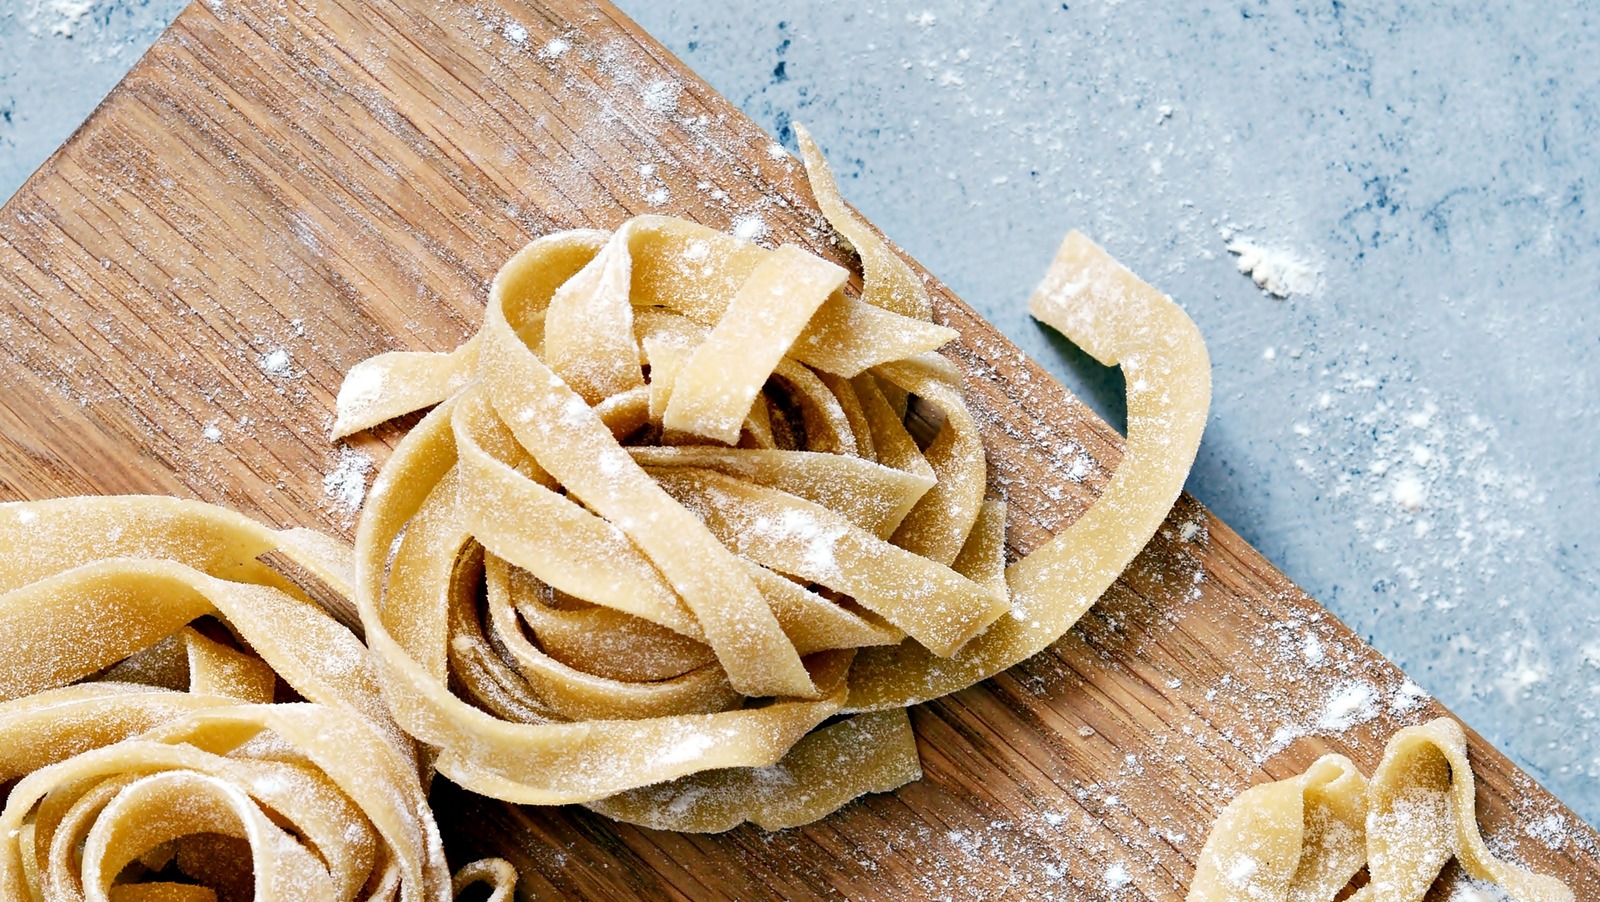 Is It Dangerous To Eat Uncooked Raw Pasta?